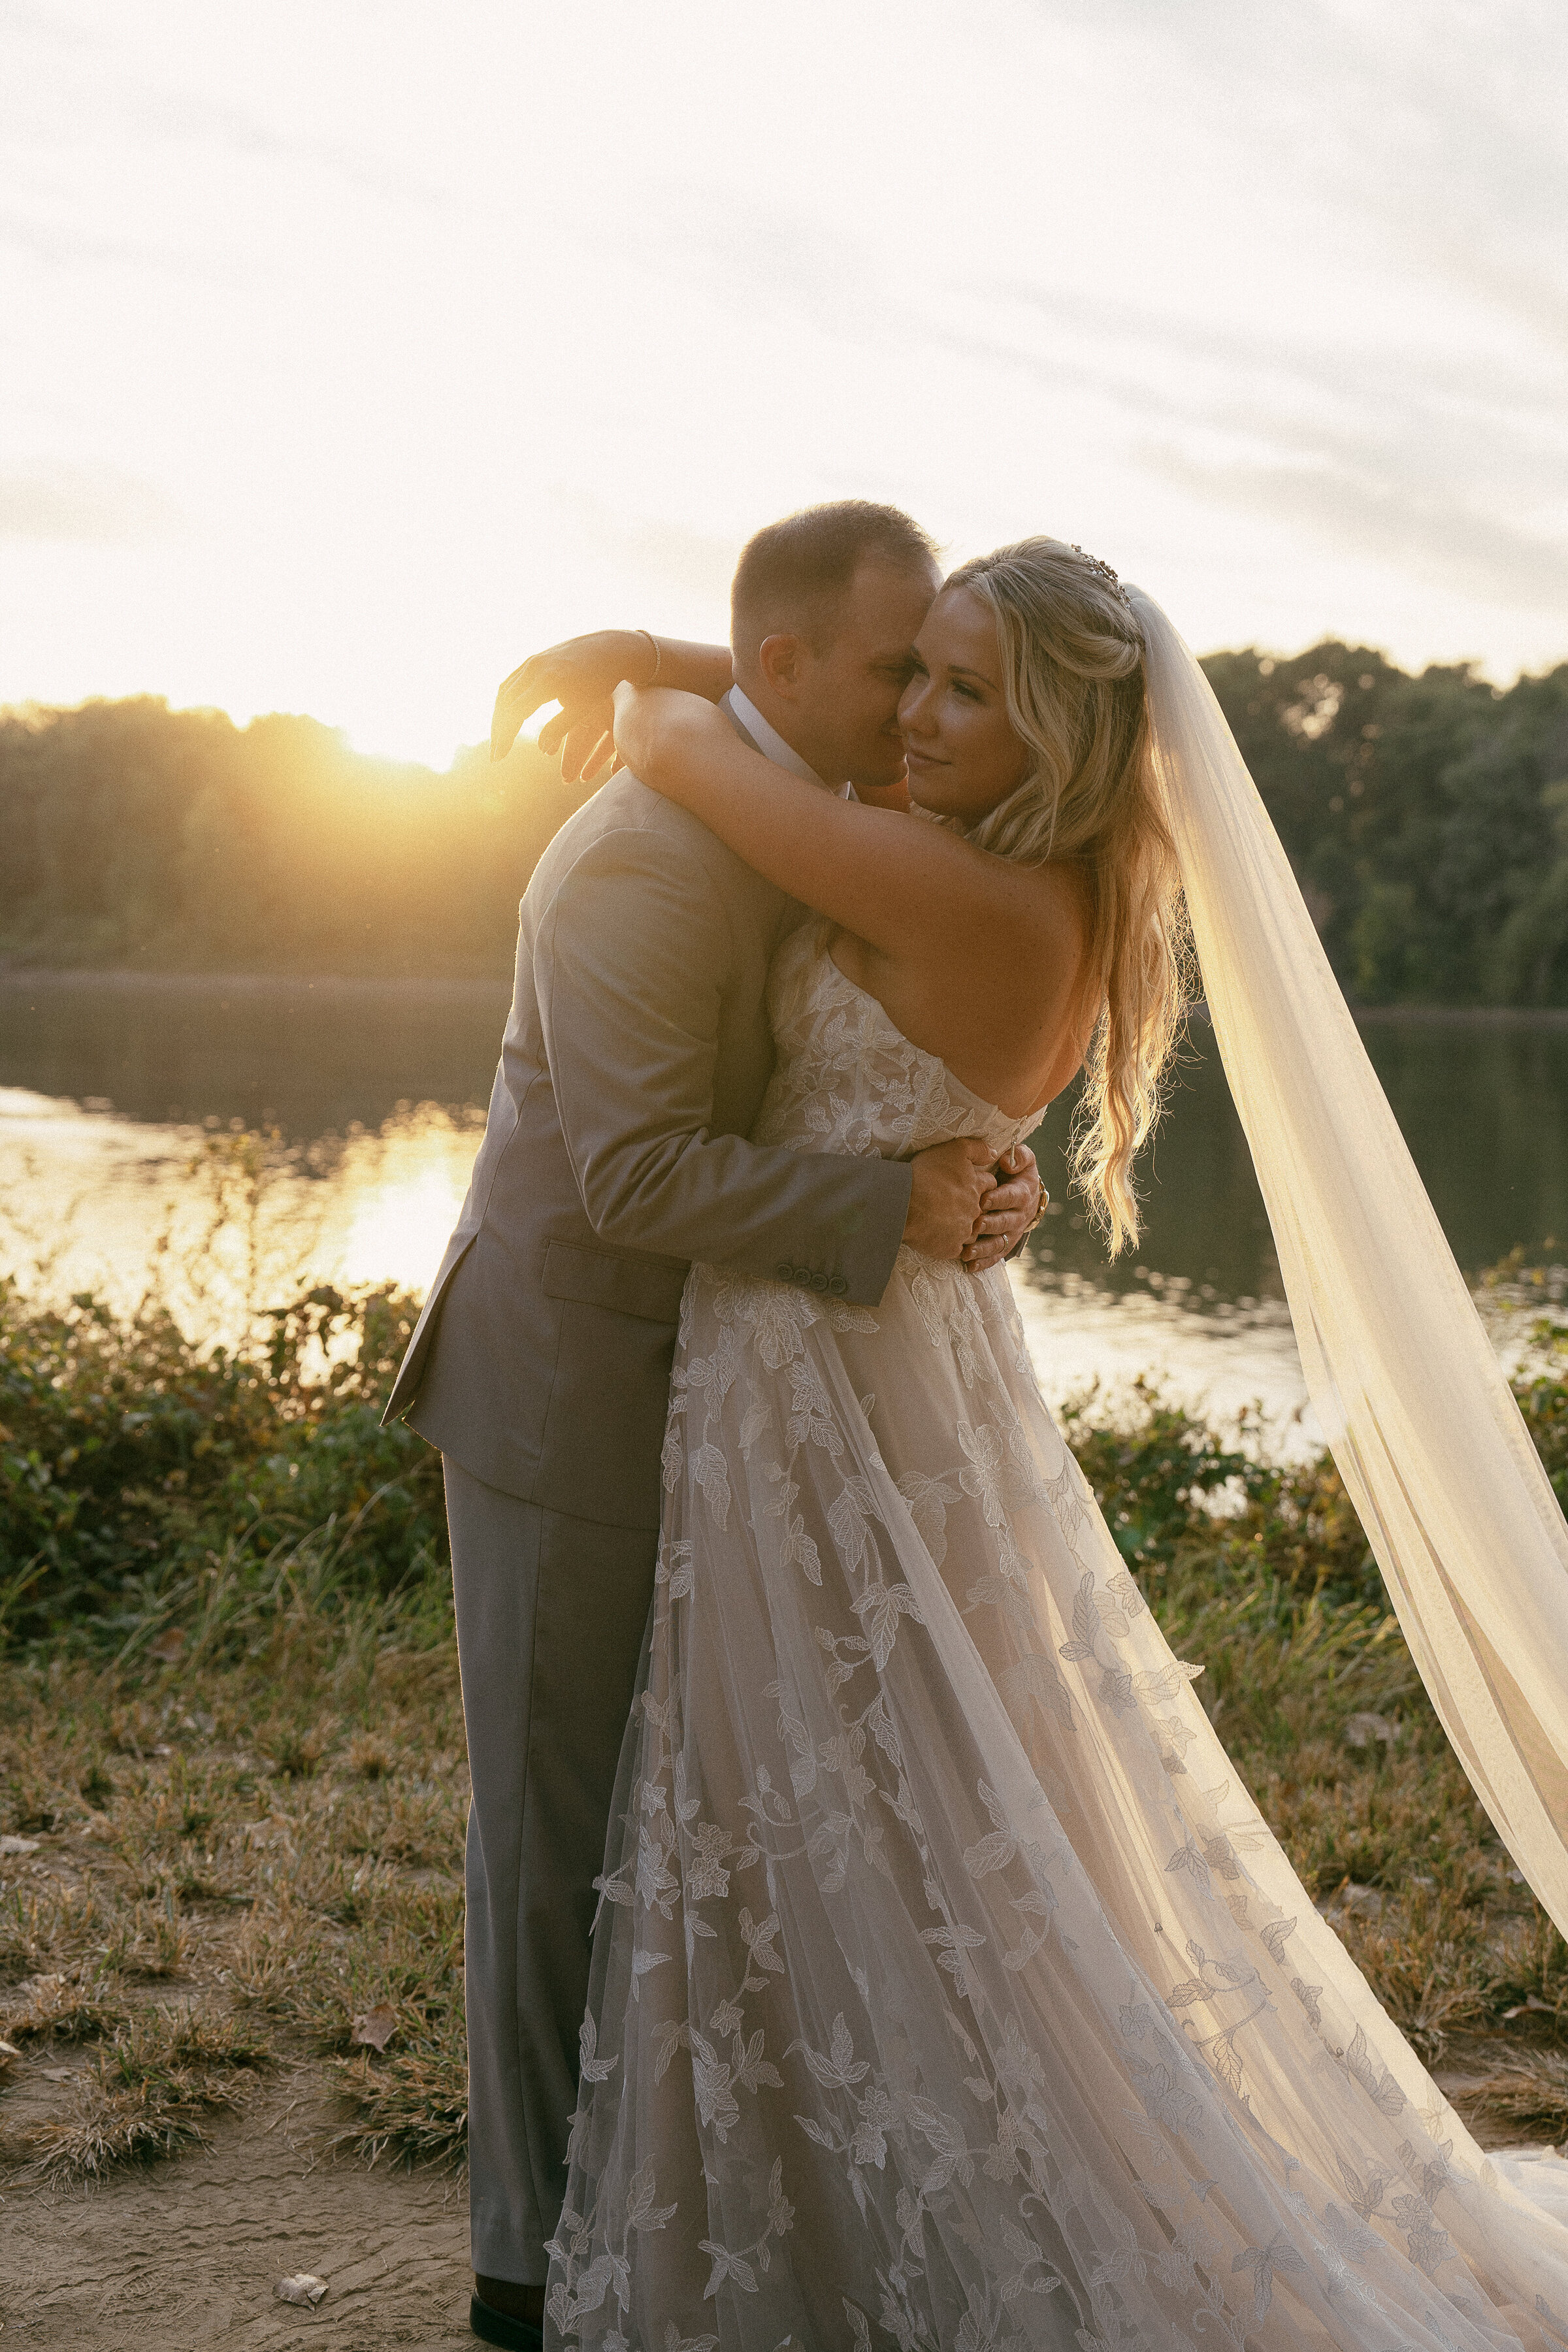 Bride and groom embracing at sunset by river in wedding photoshoot